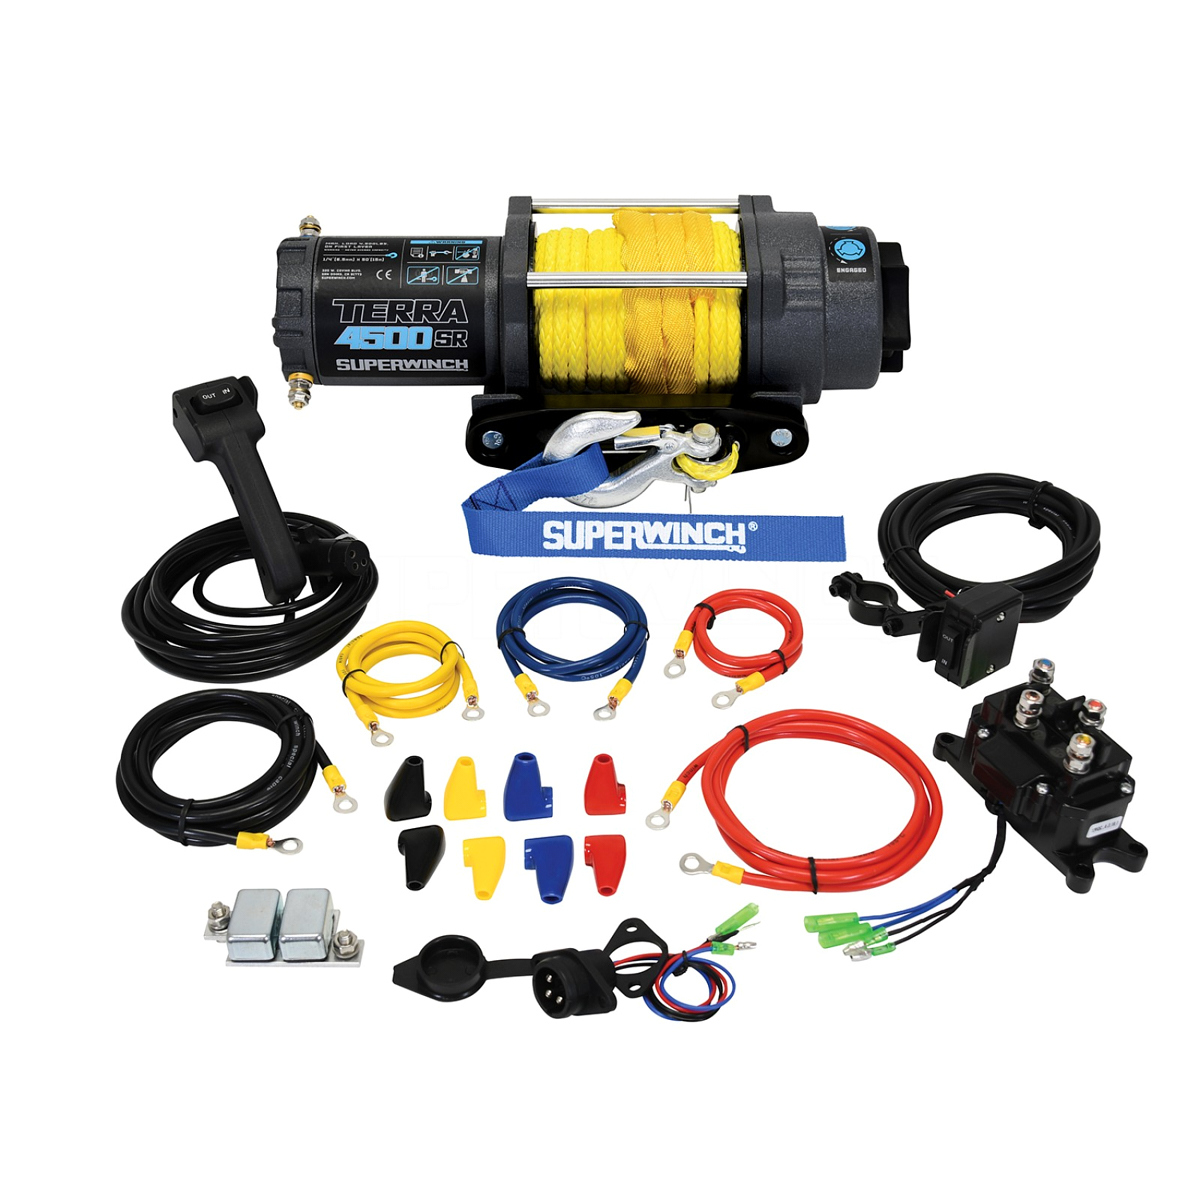 SuperWinch 1145270 Winch, Terra, 4500 lb Capacity, Hawse Fairlead, 10 ft Remote, 1/4 in x 50 ft Synthetic Rope, 12V, Kit